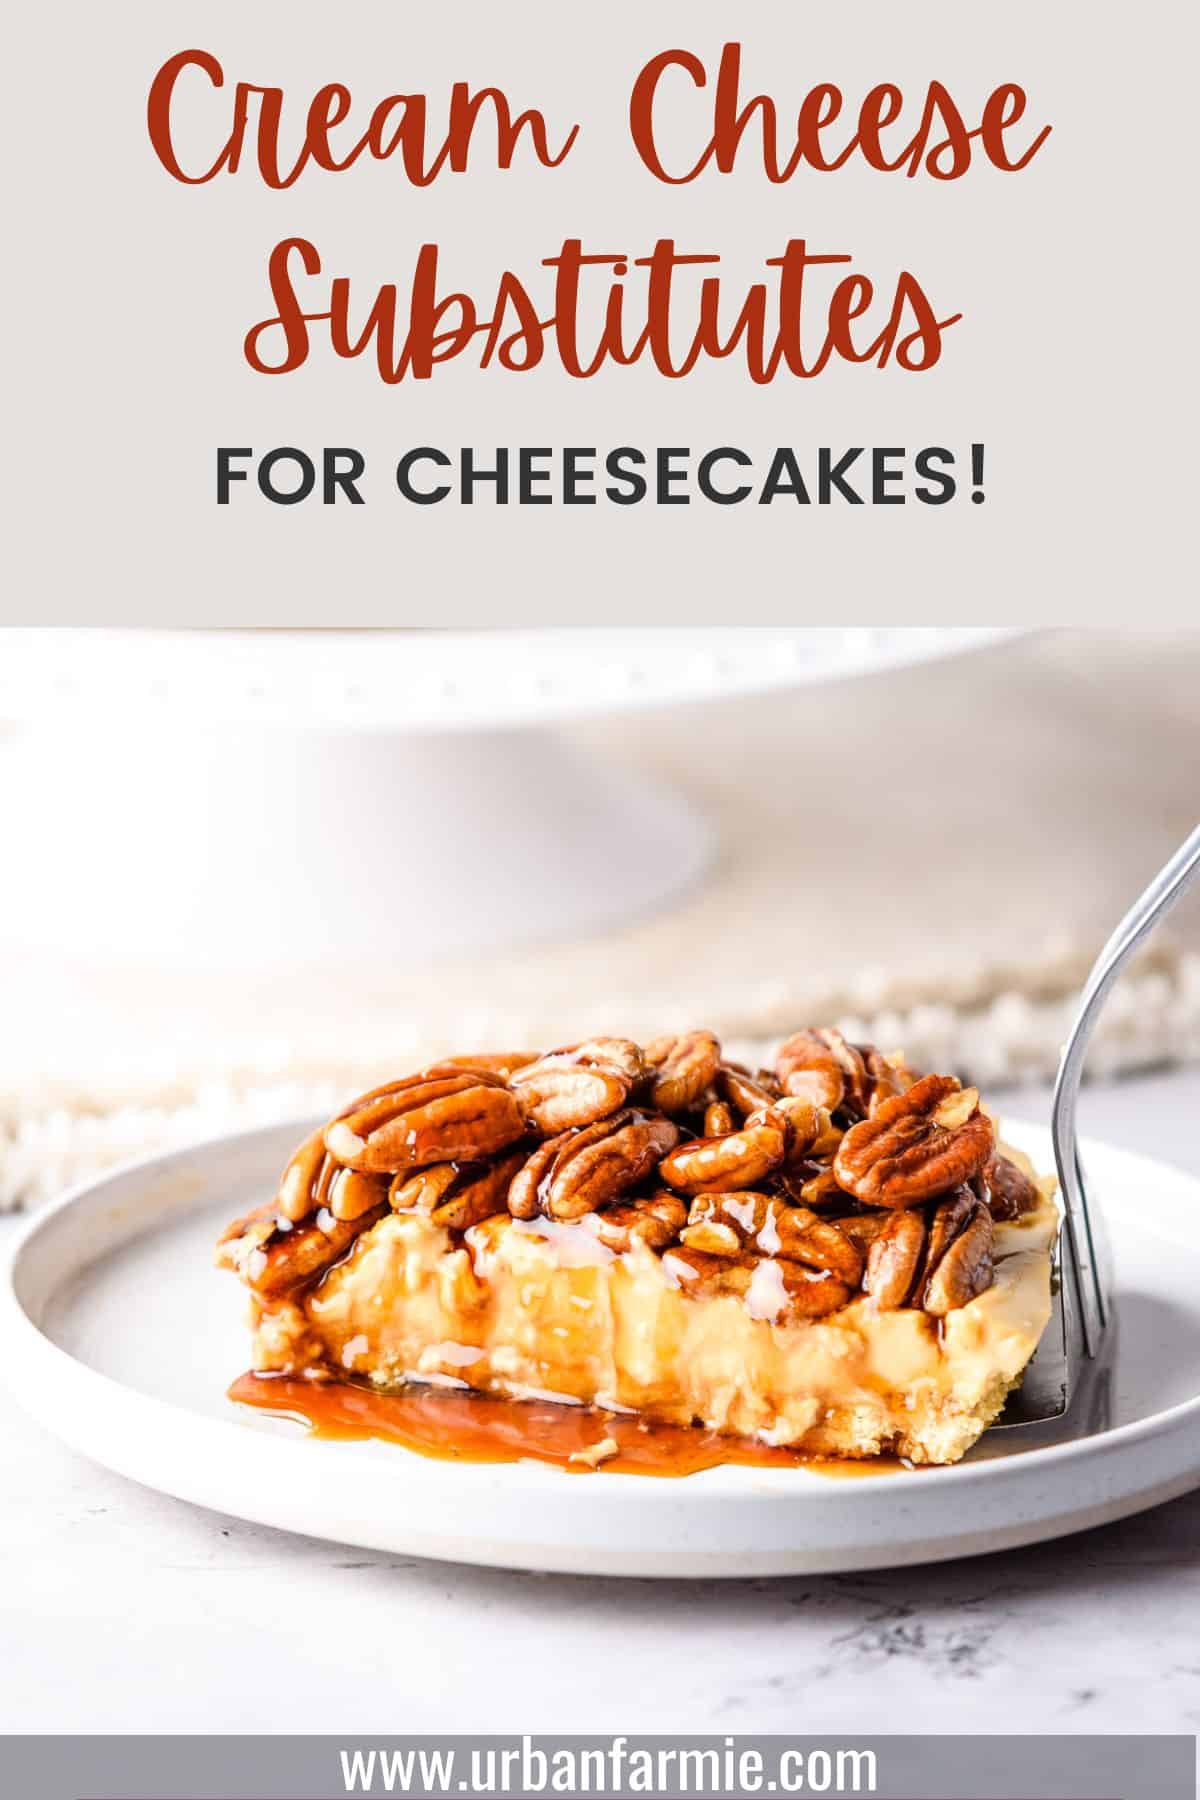 Image of pecan pie cheesecake with header of article as title.